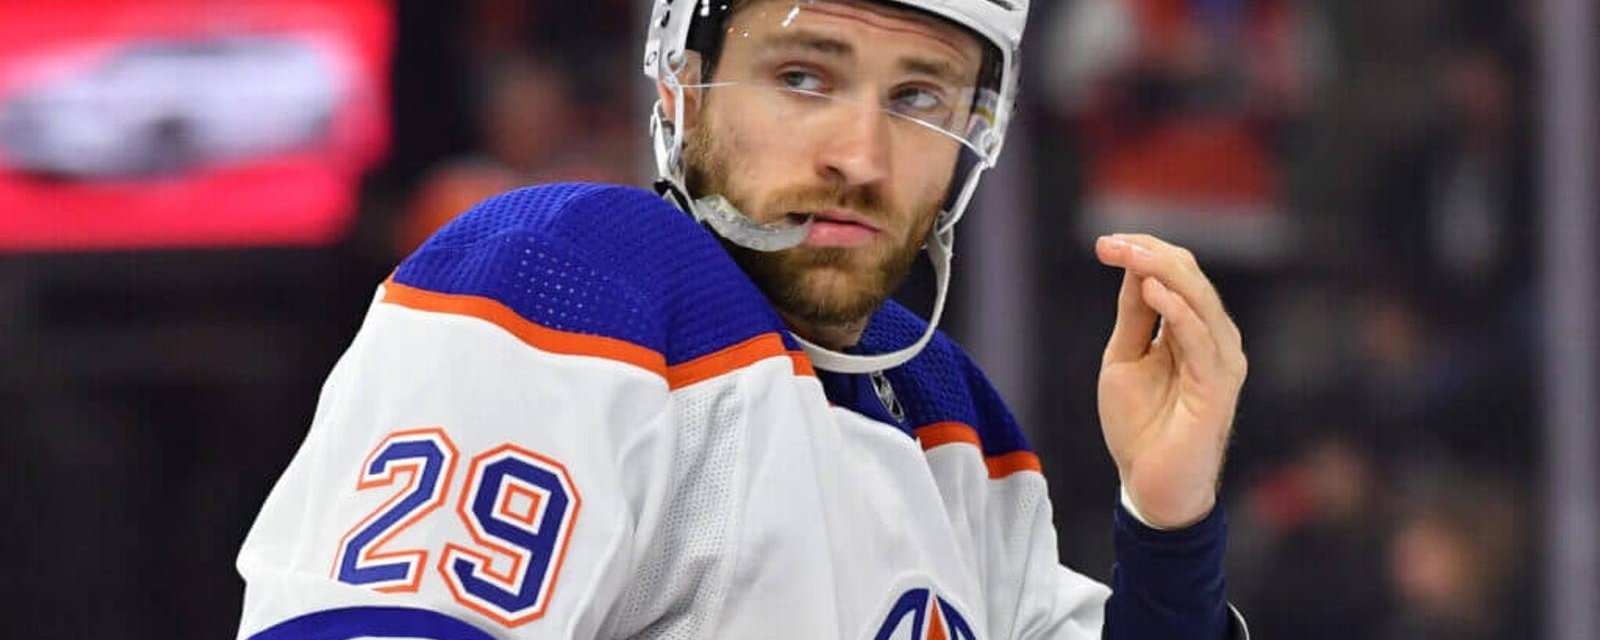 Leon Draisaitl’s future in Edmonton leaked and gets fans reacting!